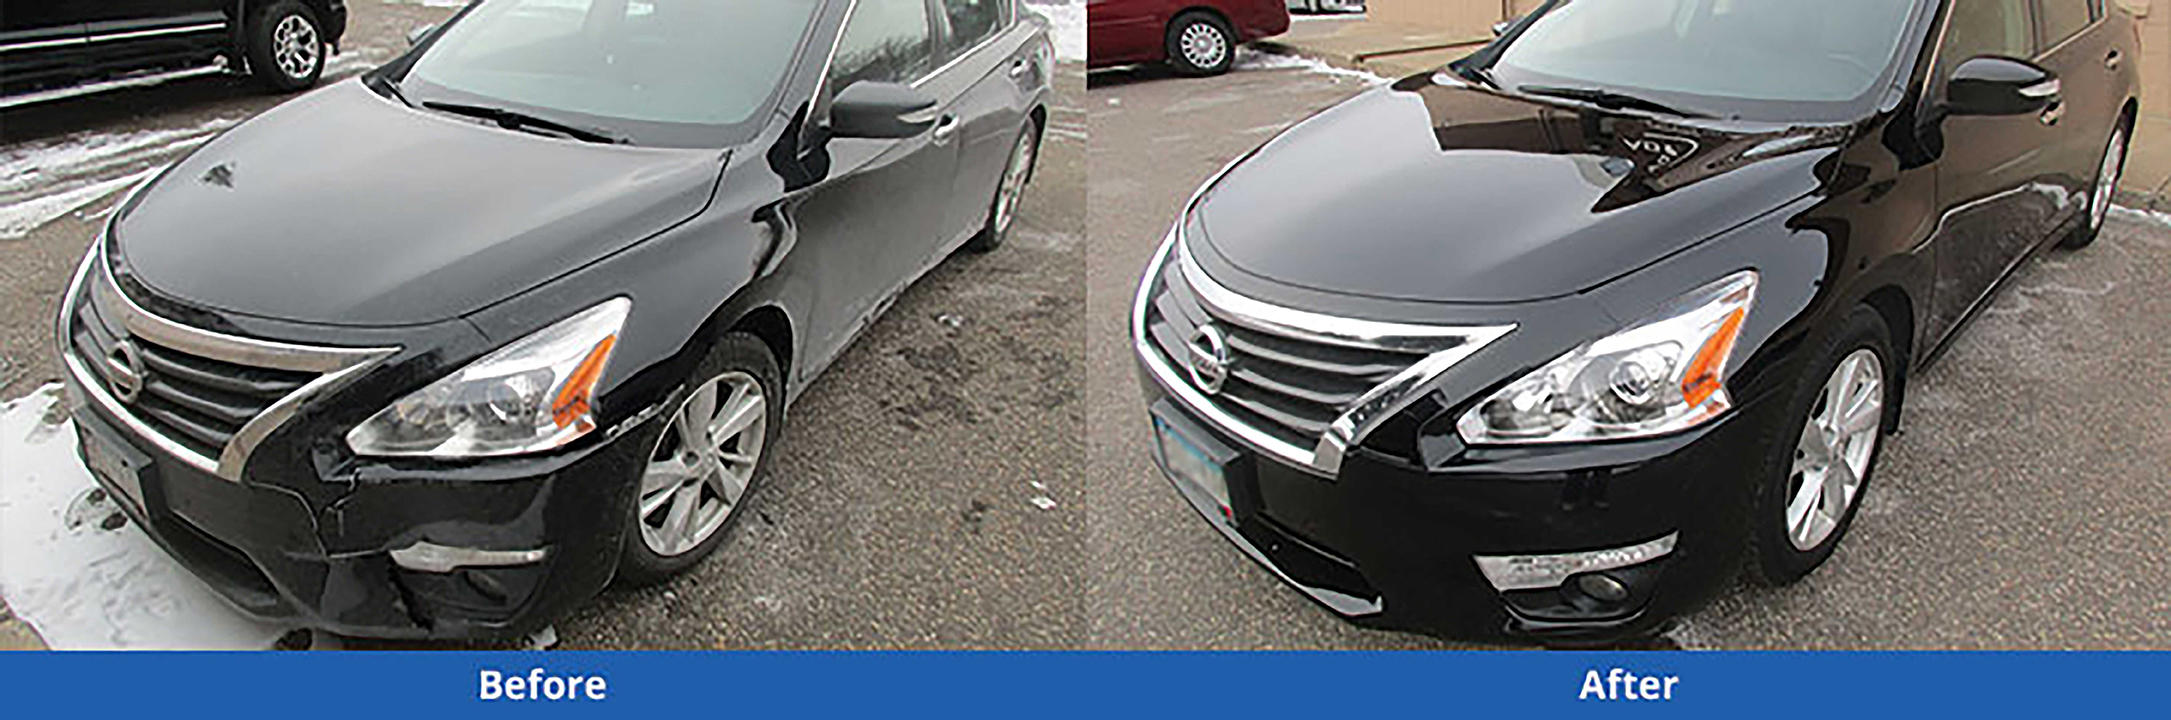 Advanced Collision Repair works hard to return your vehicle back to you in pre-accident condition.